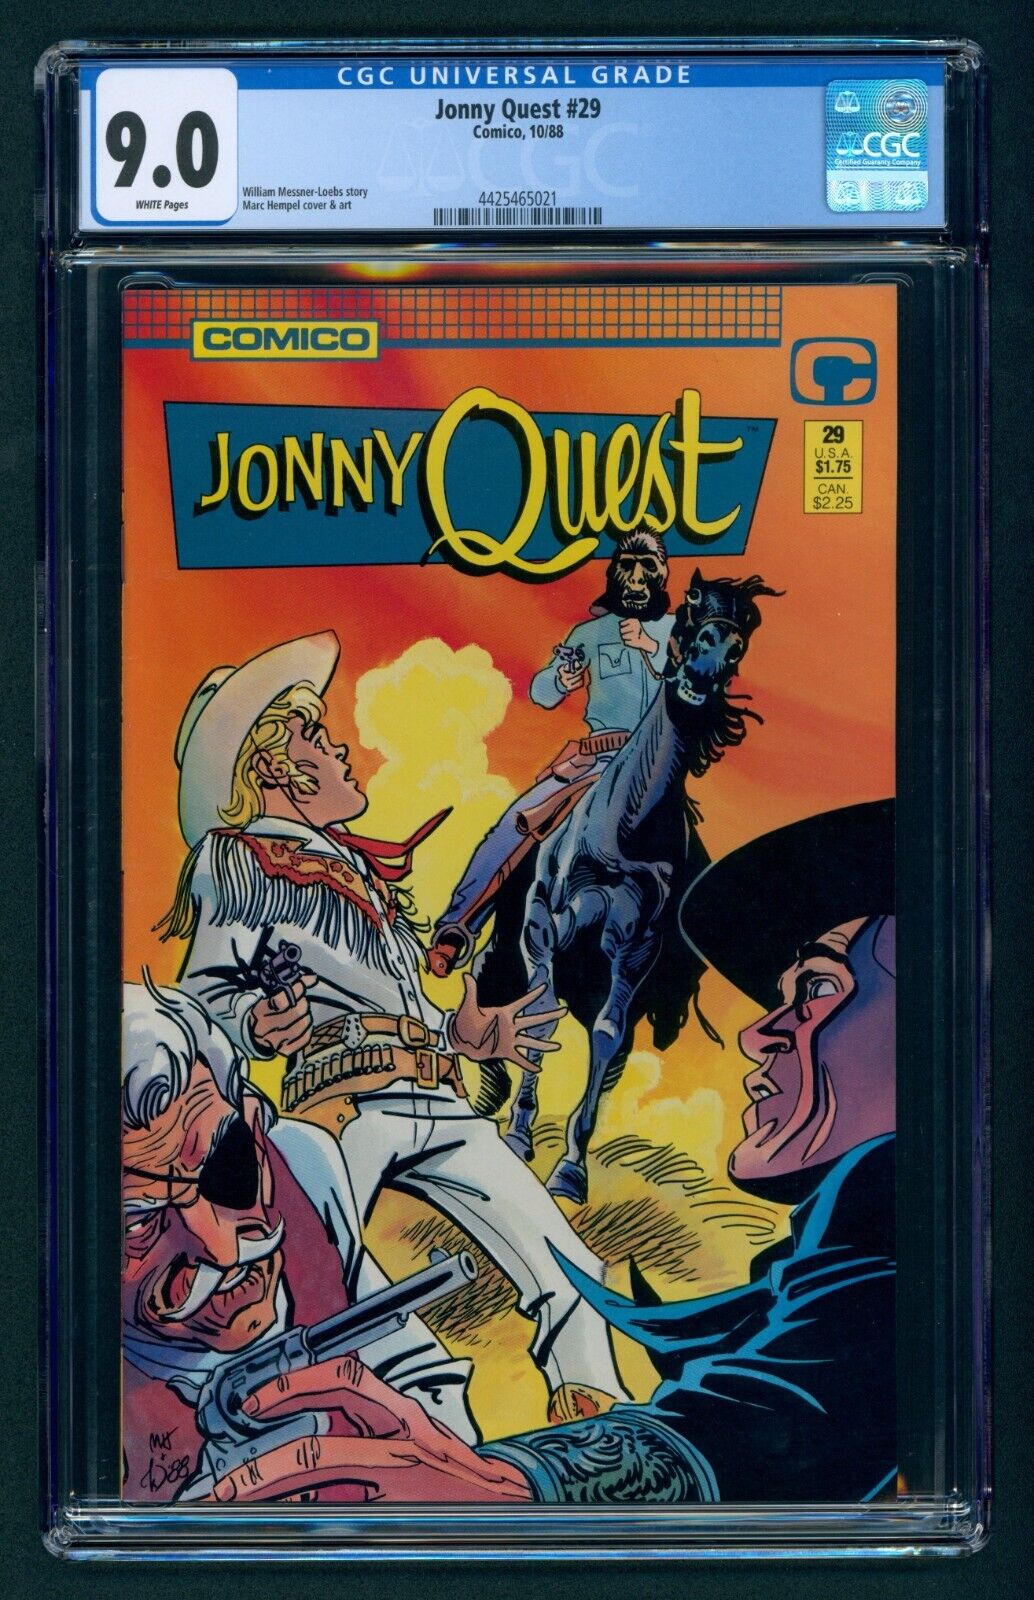 RARE Jonny Quest #29 CGC 9.0 W The only copy on the Census Kings of the West